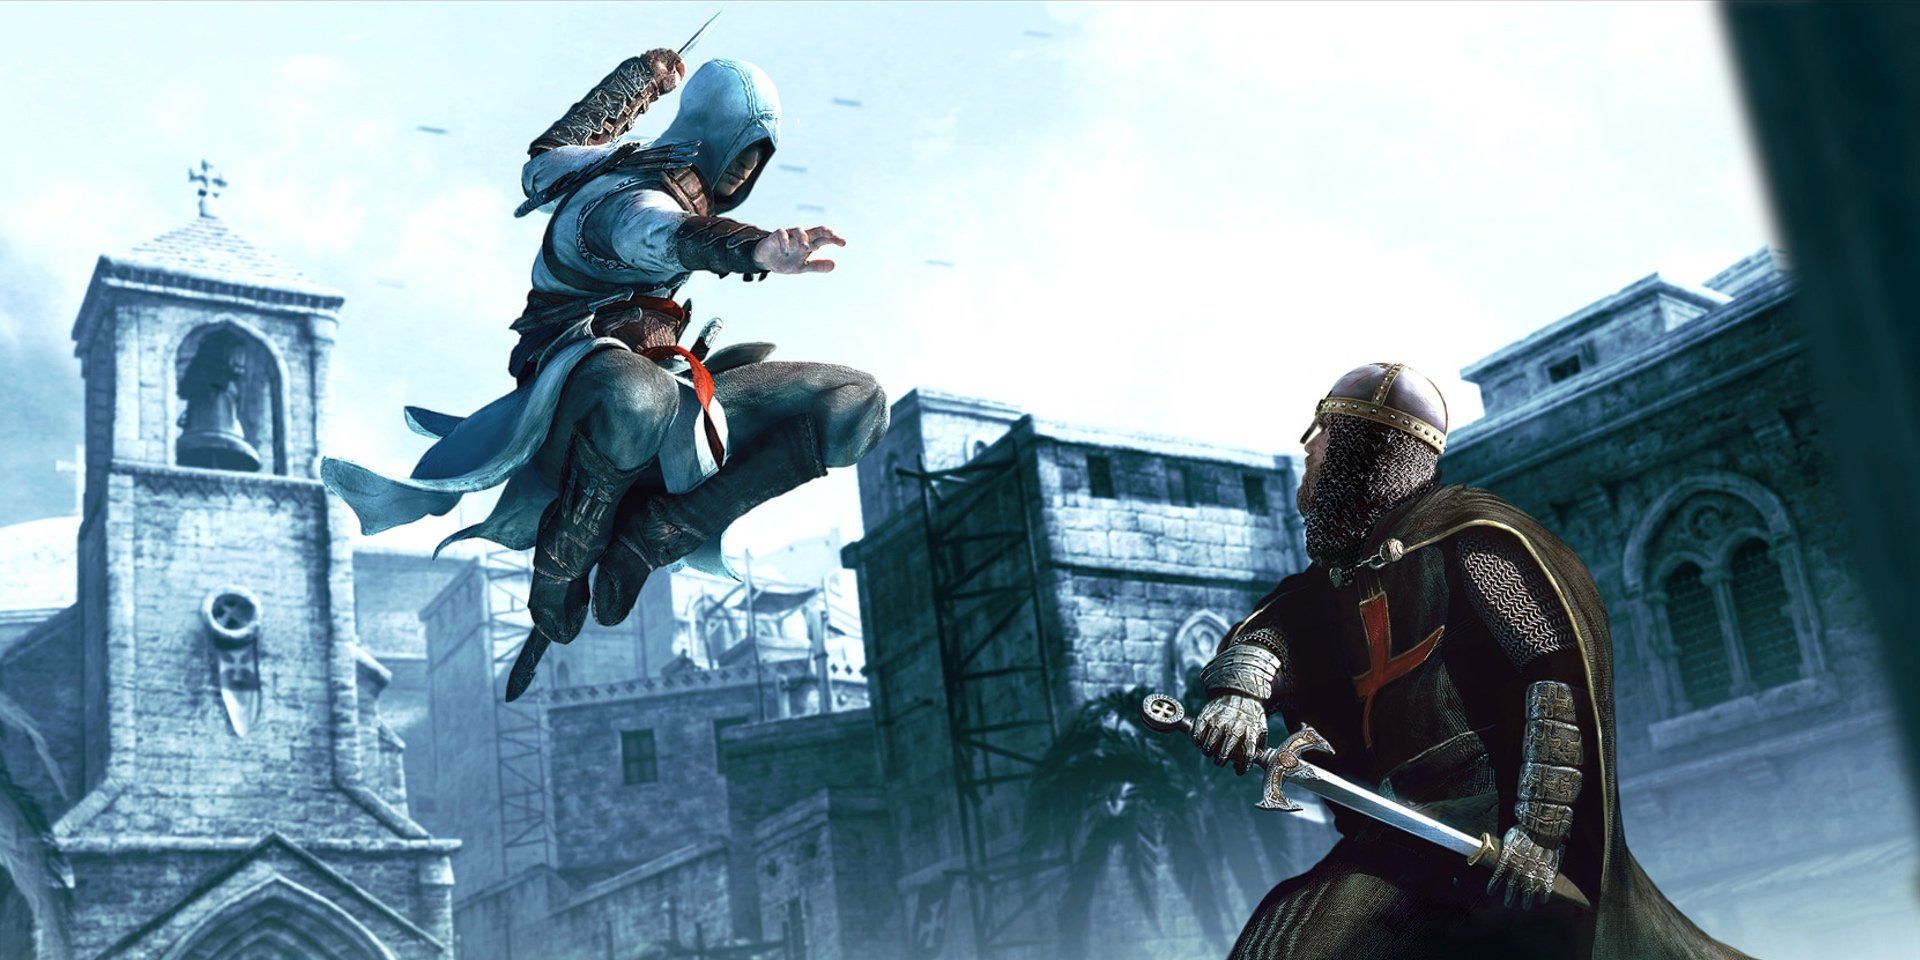 The original Assassin's Creed protagonist, Altaïr, leaps toward a Templar Knight with his hidden blade drawn. He wears the trademark white cowl that many series protagonists have donned.